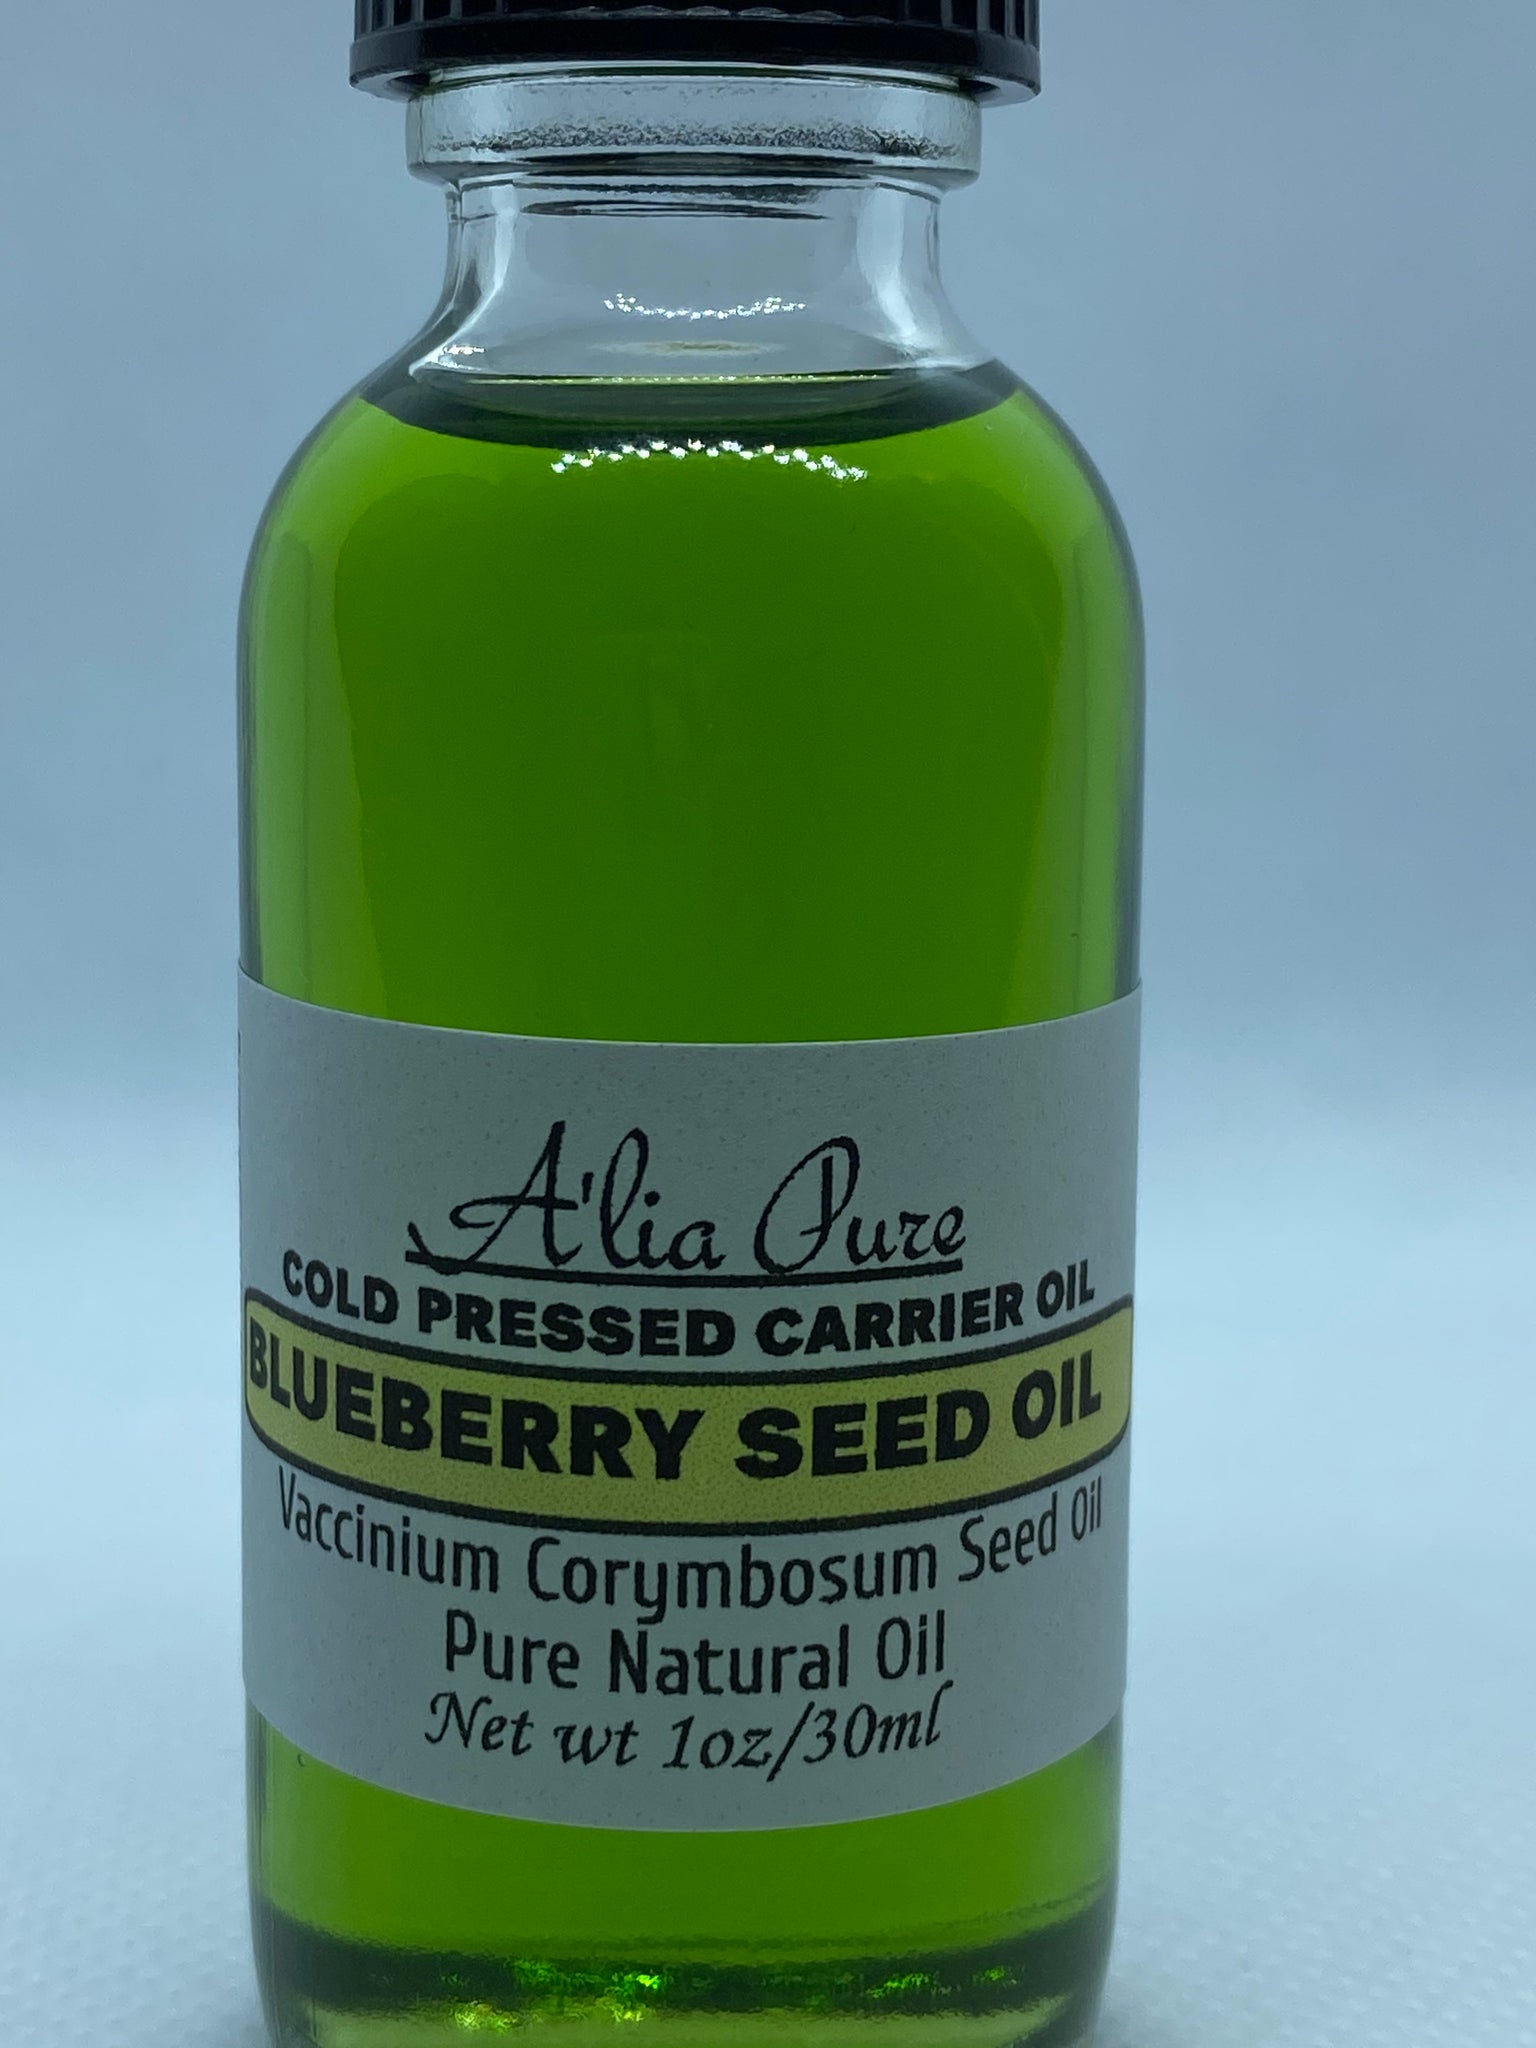 Blueberry Seed Oil